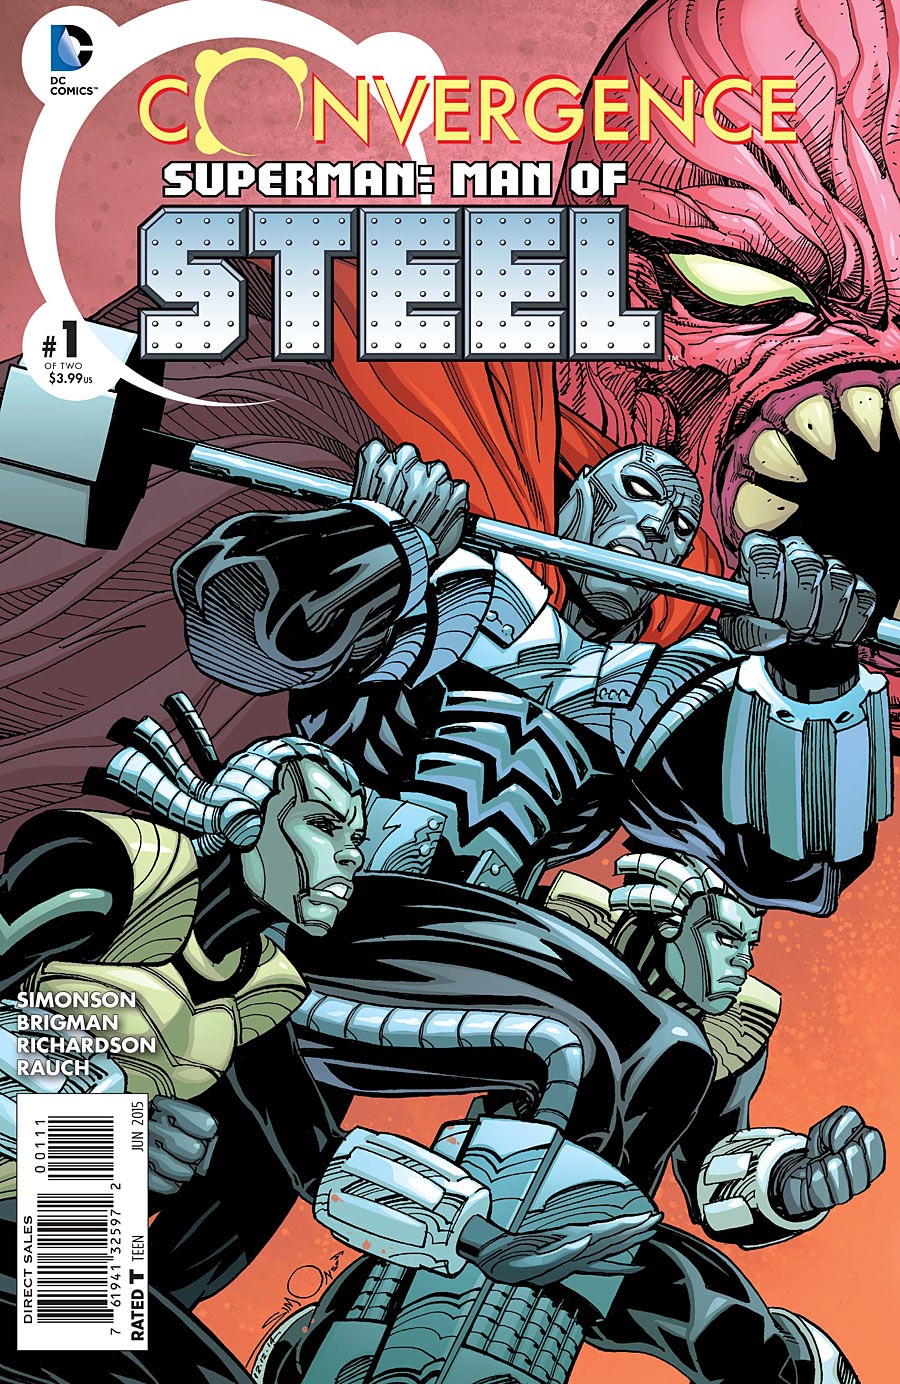 Convergence: Superman: The Man of Steel Vol. 1 #1